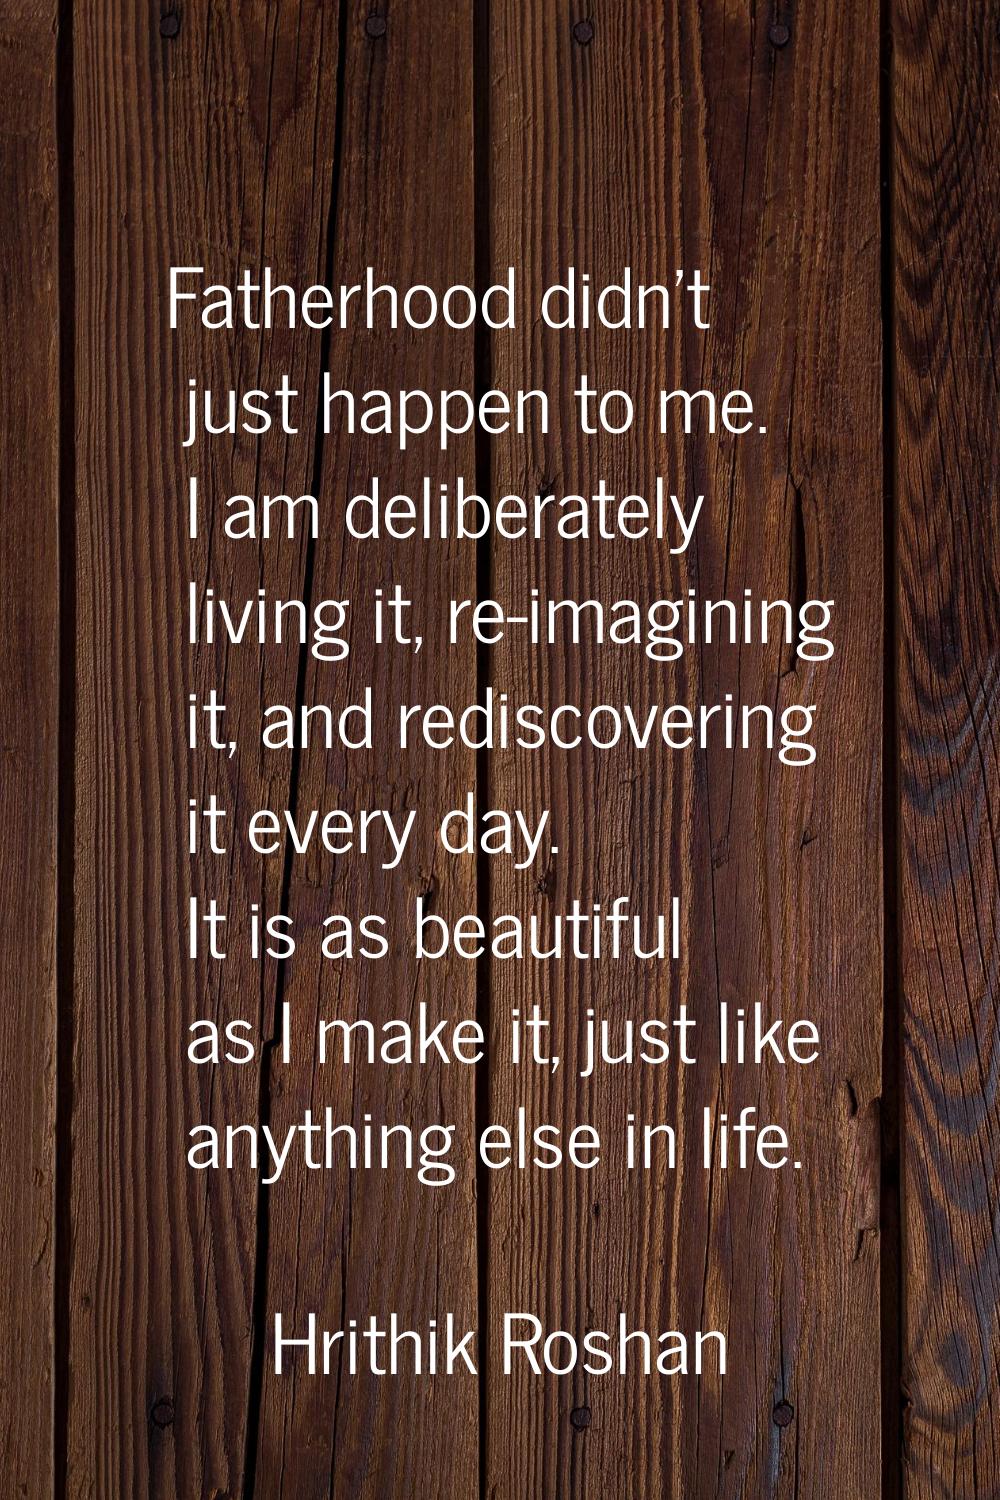 Fatherhood didn't just happen to me. I am deliberately living it, re-imagining it, and rediscoverin